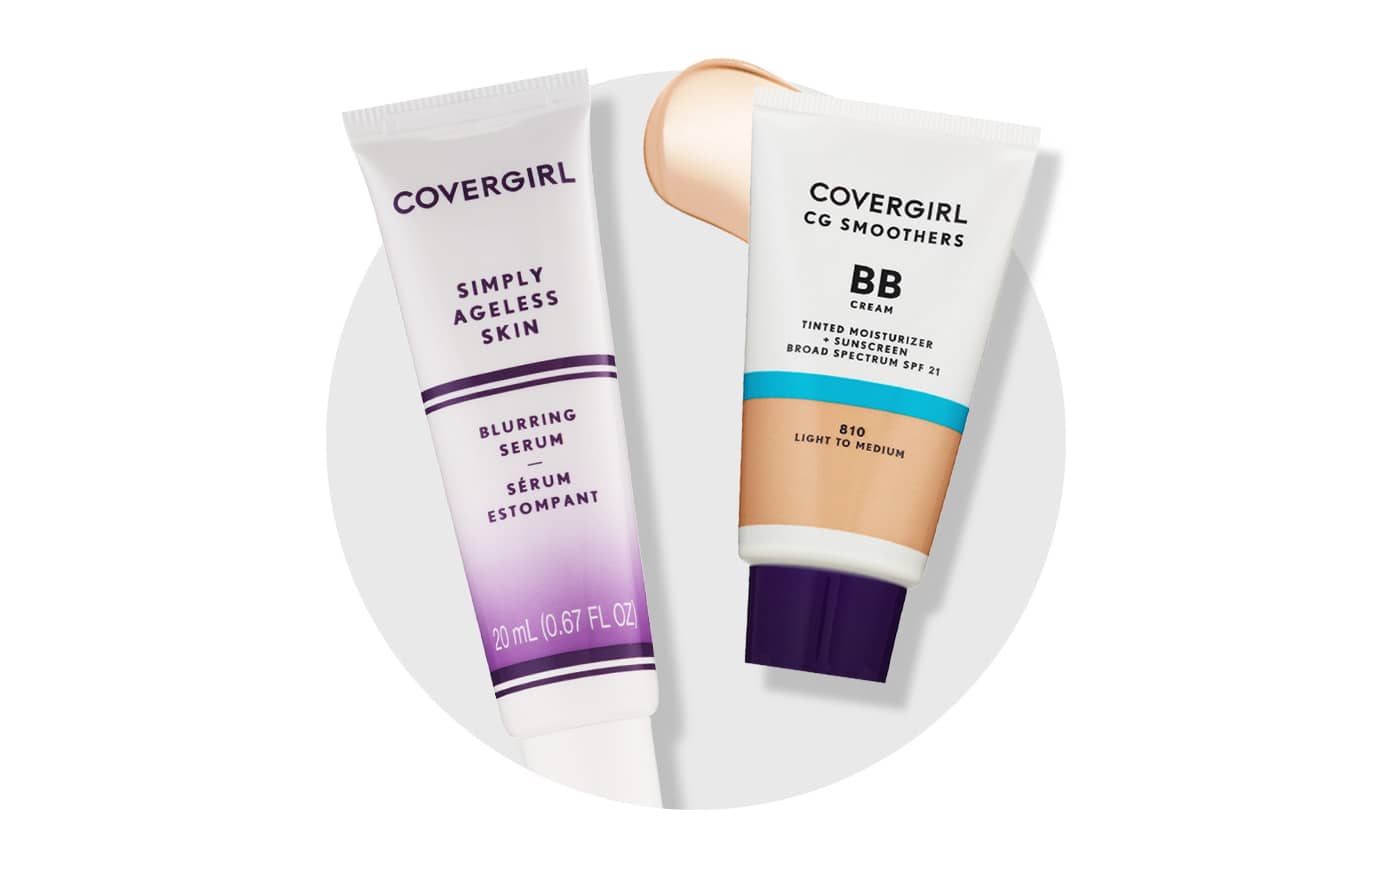 CoverGirl facial care products